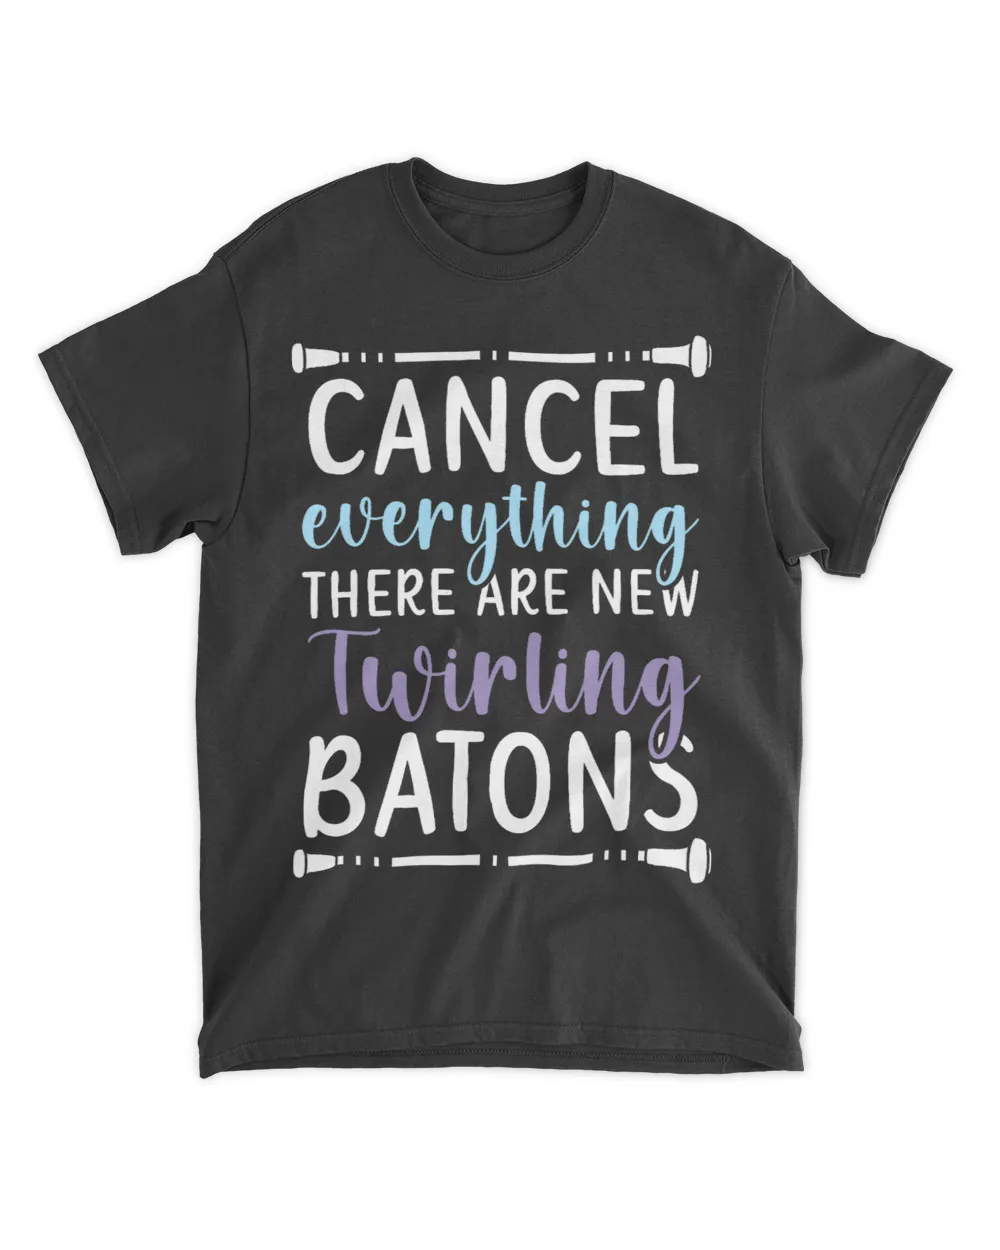 Cancel Everything There Are New Twirling Batons